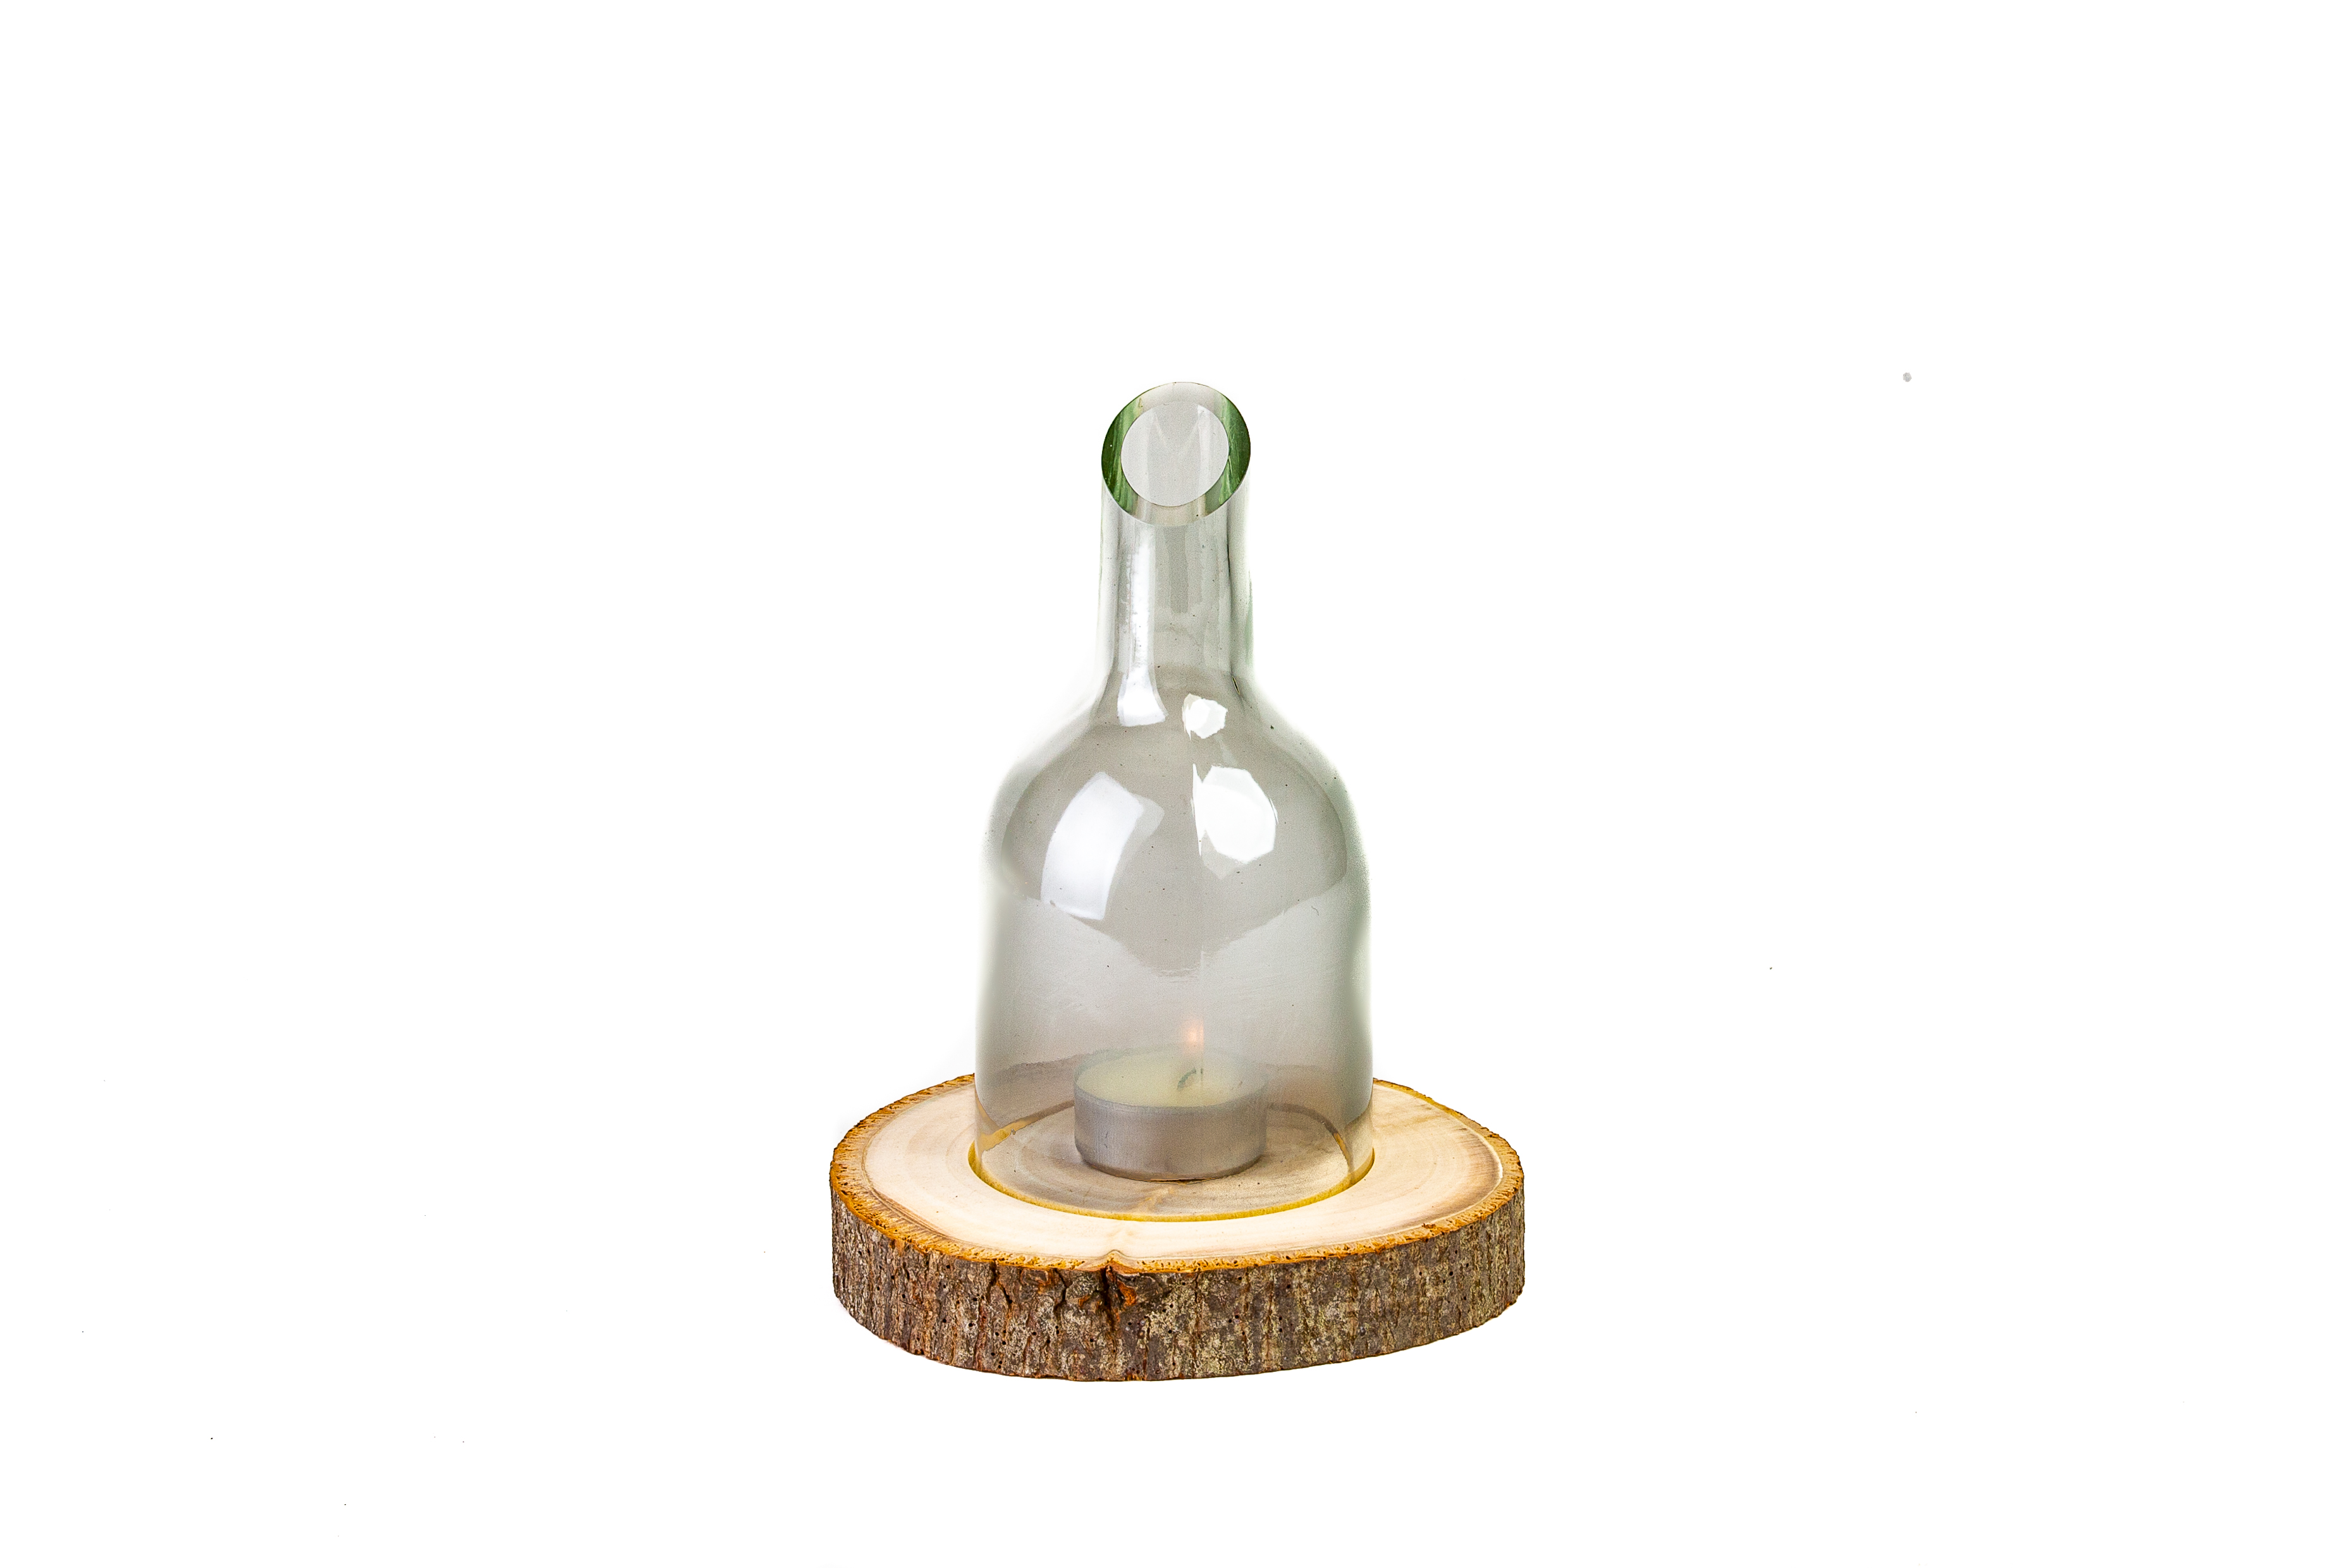 Glass candlestick with round wooden base